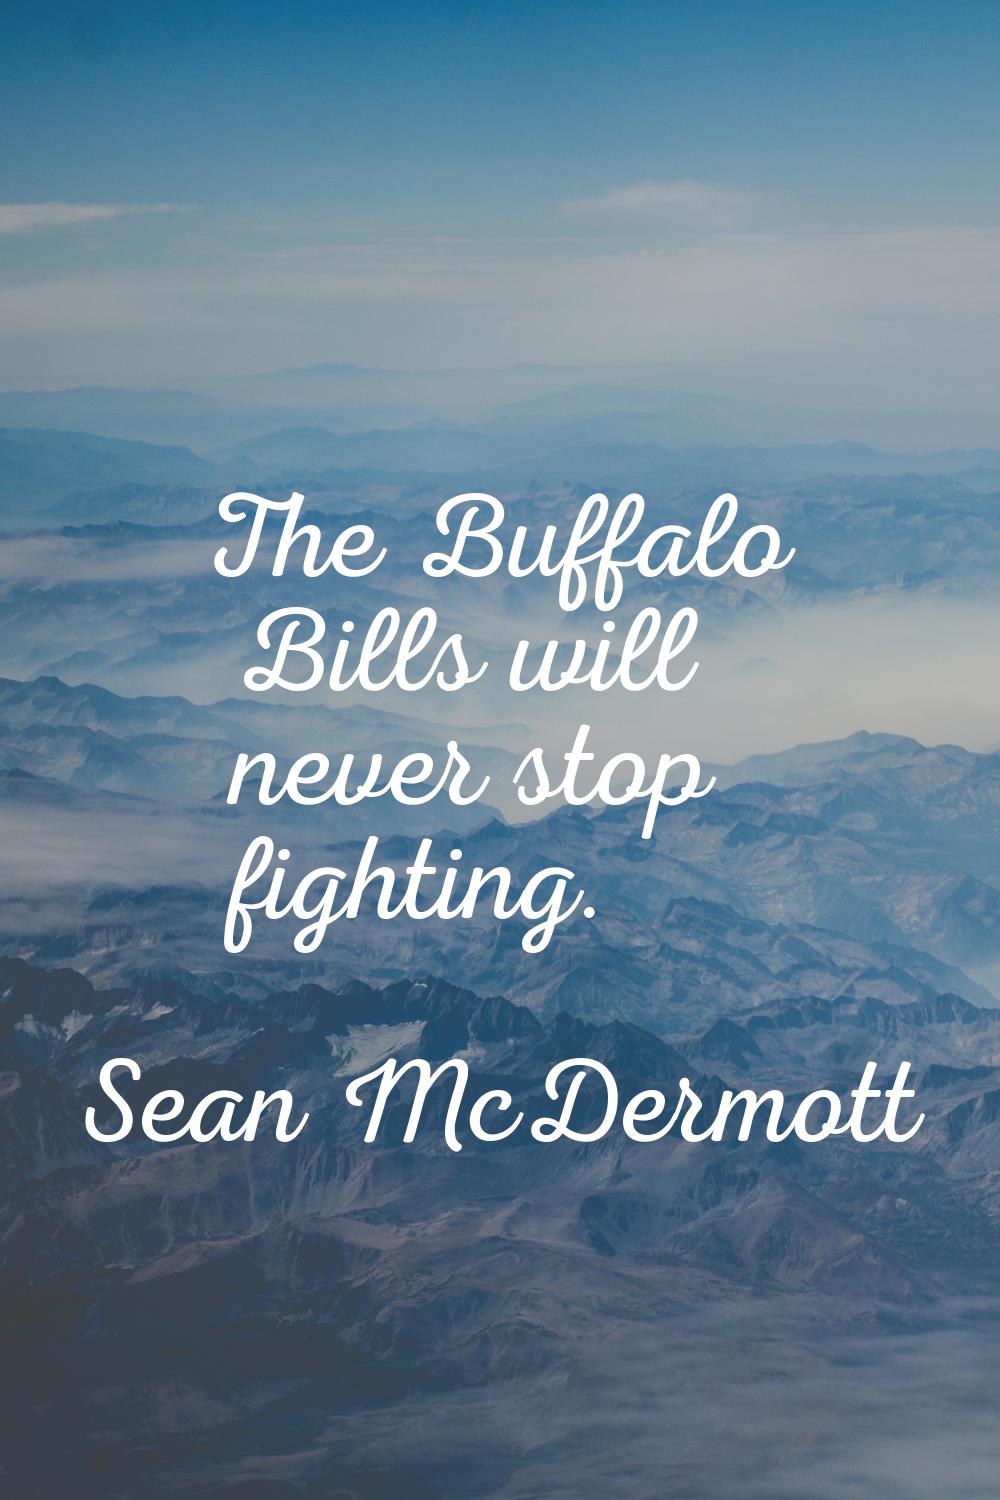 The Buffalo Bills will never stop fighting.